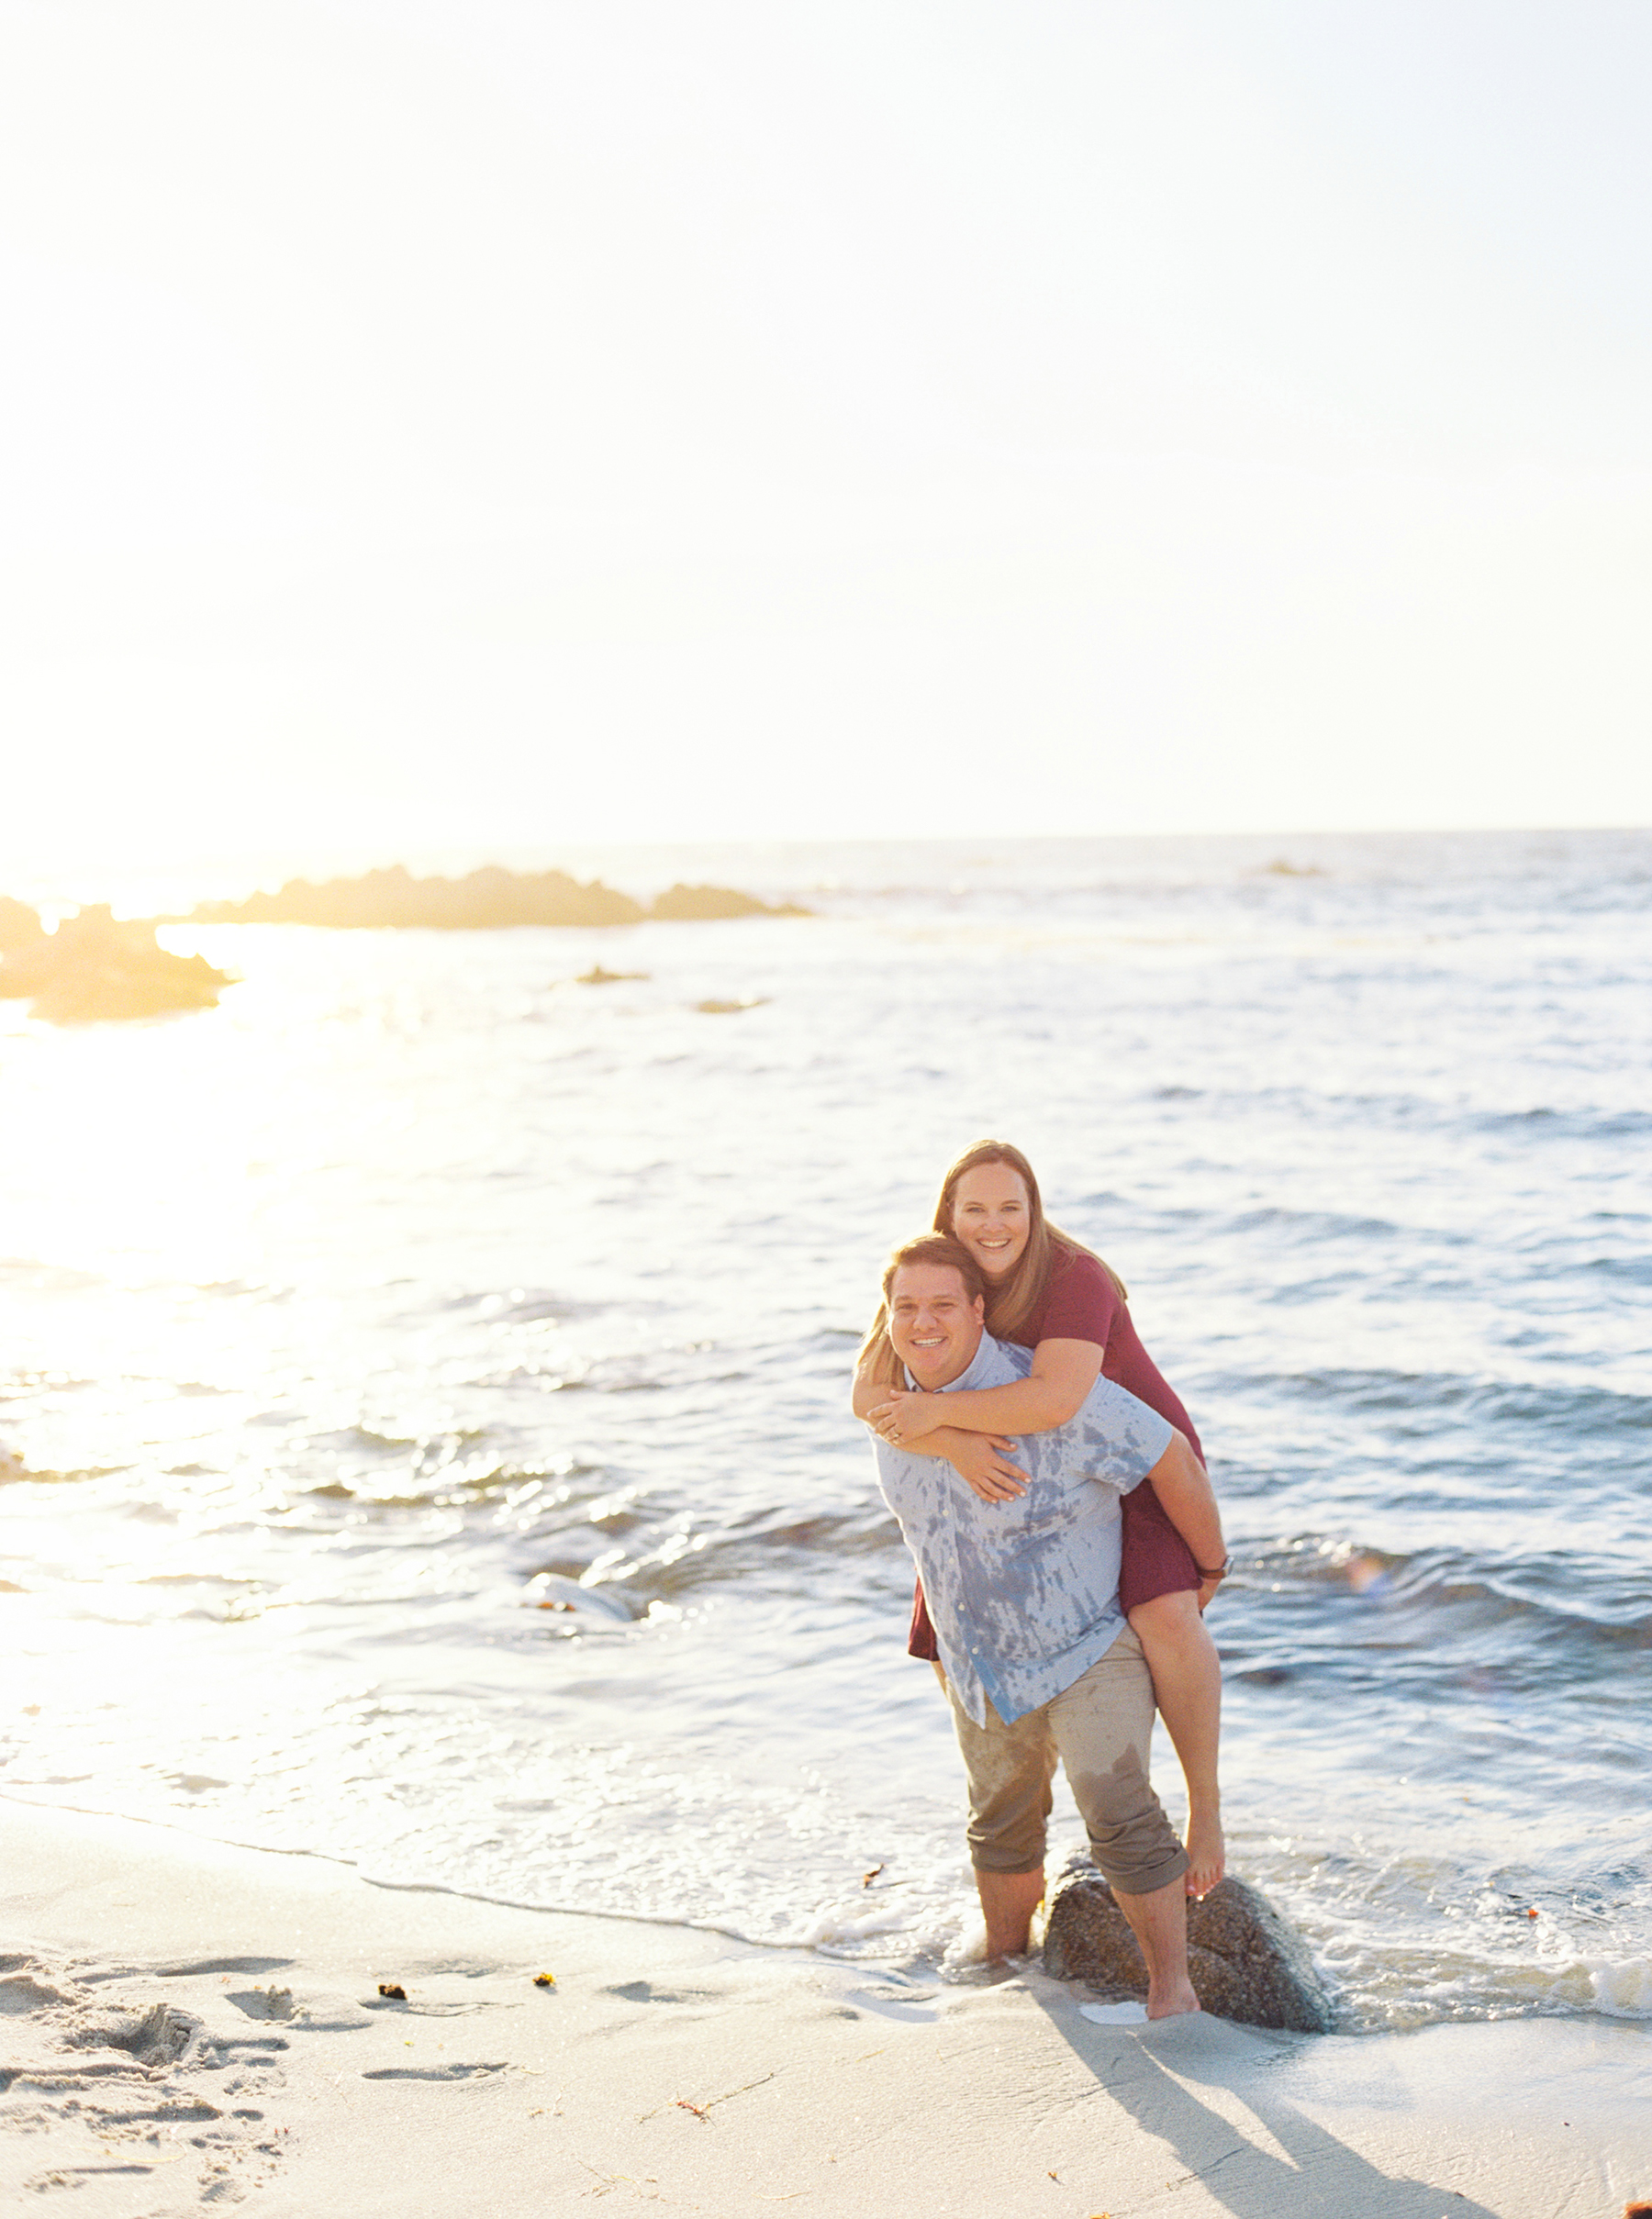 A Golden Hour Engagement Session in Monterey Sarahi Hadden11